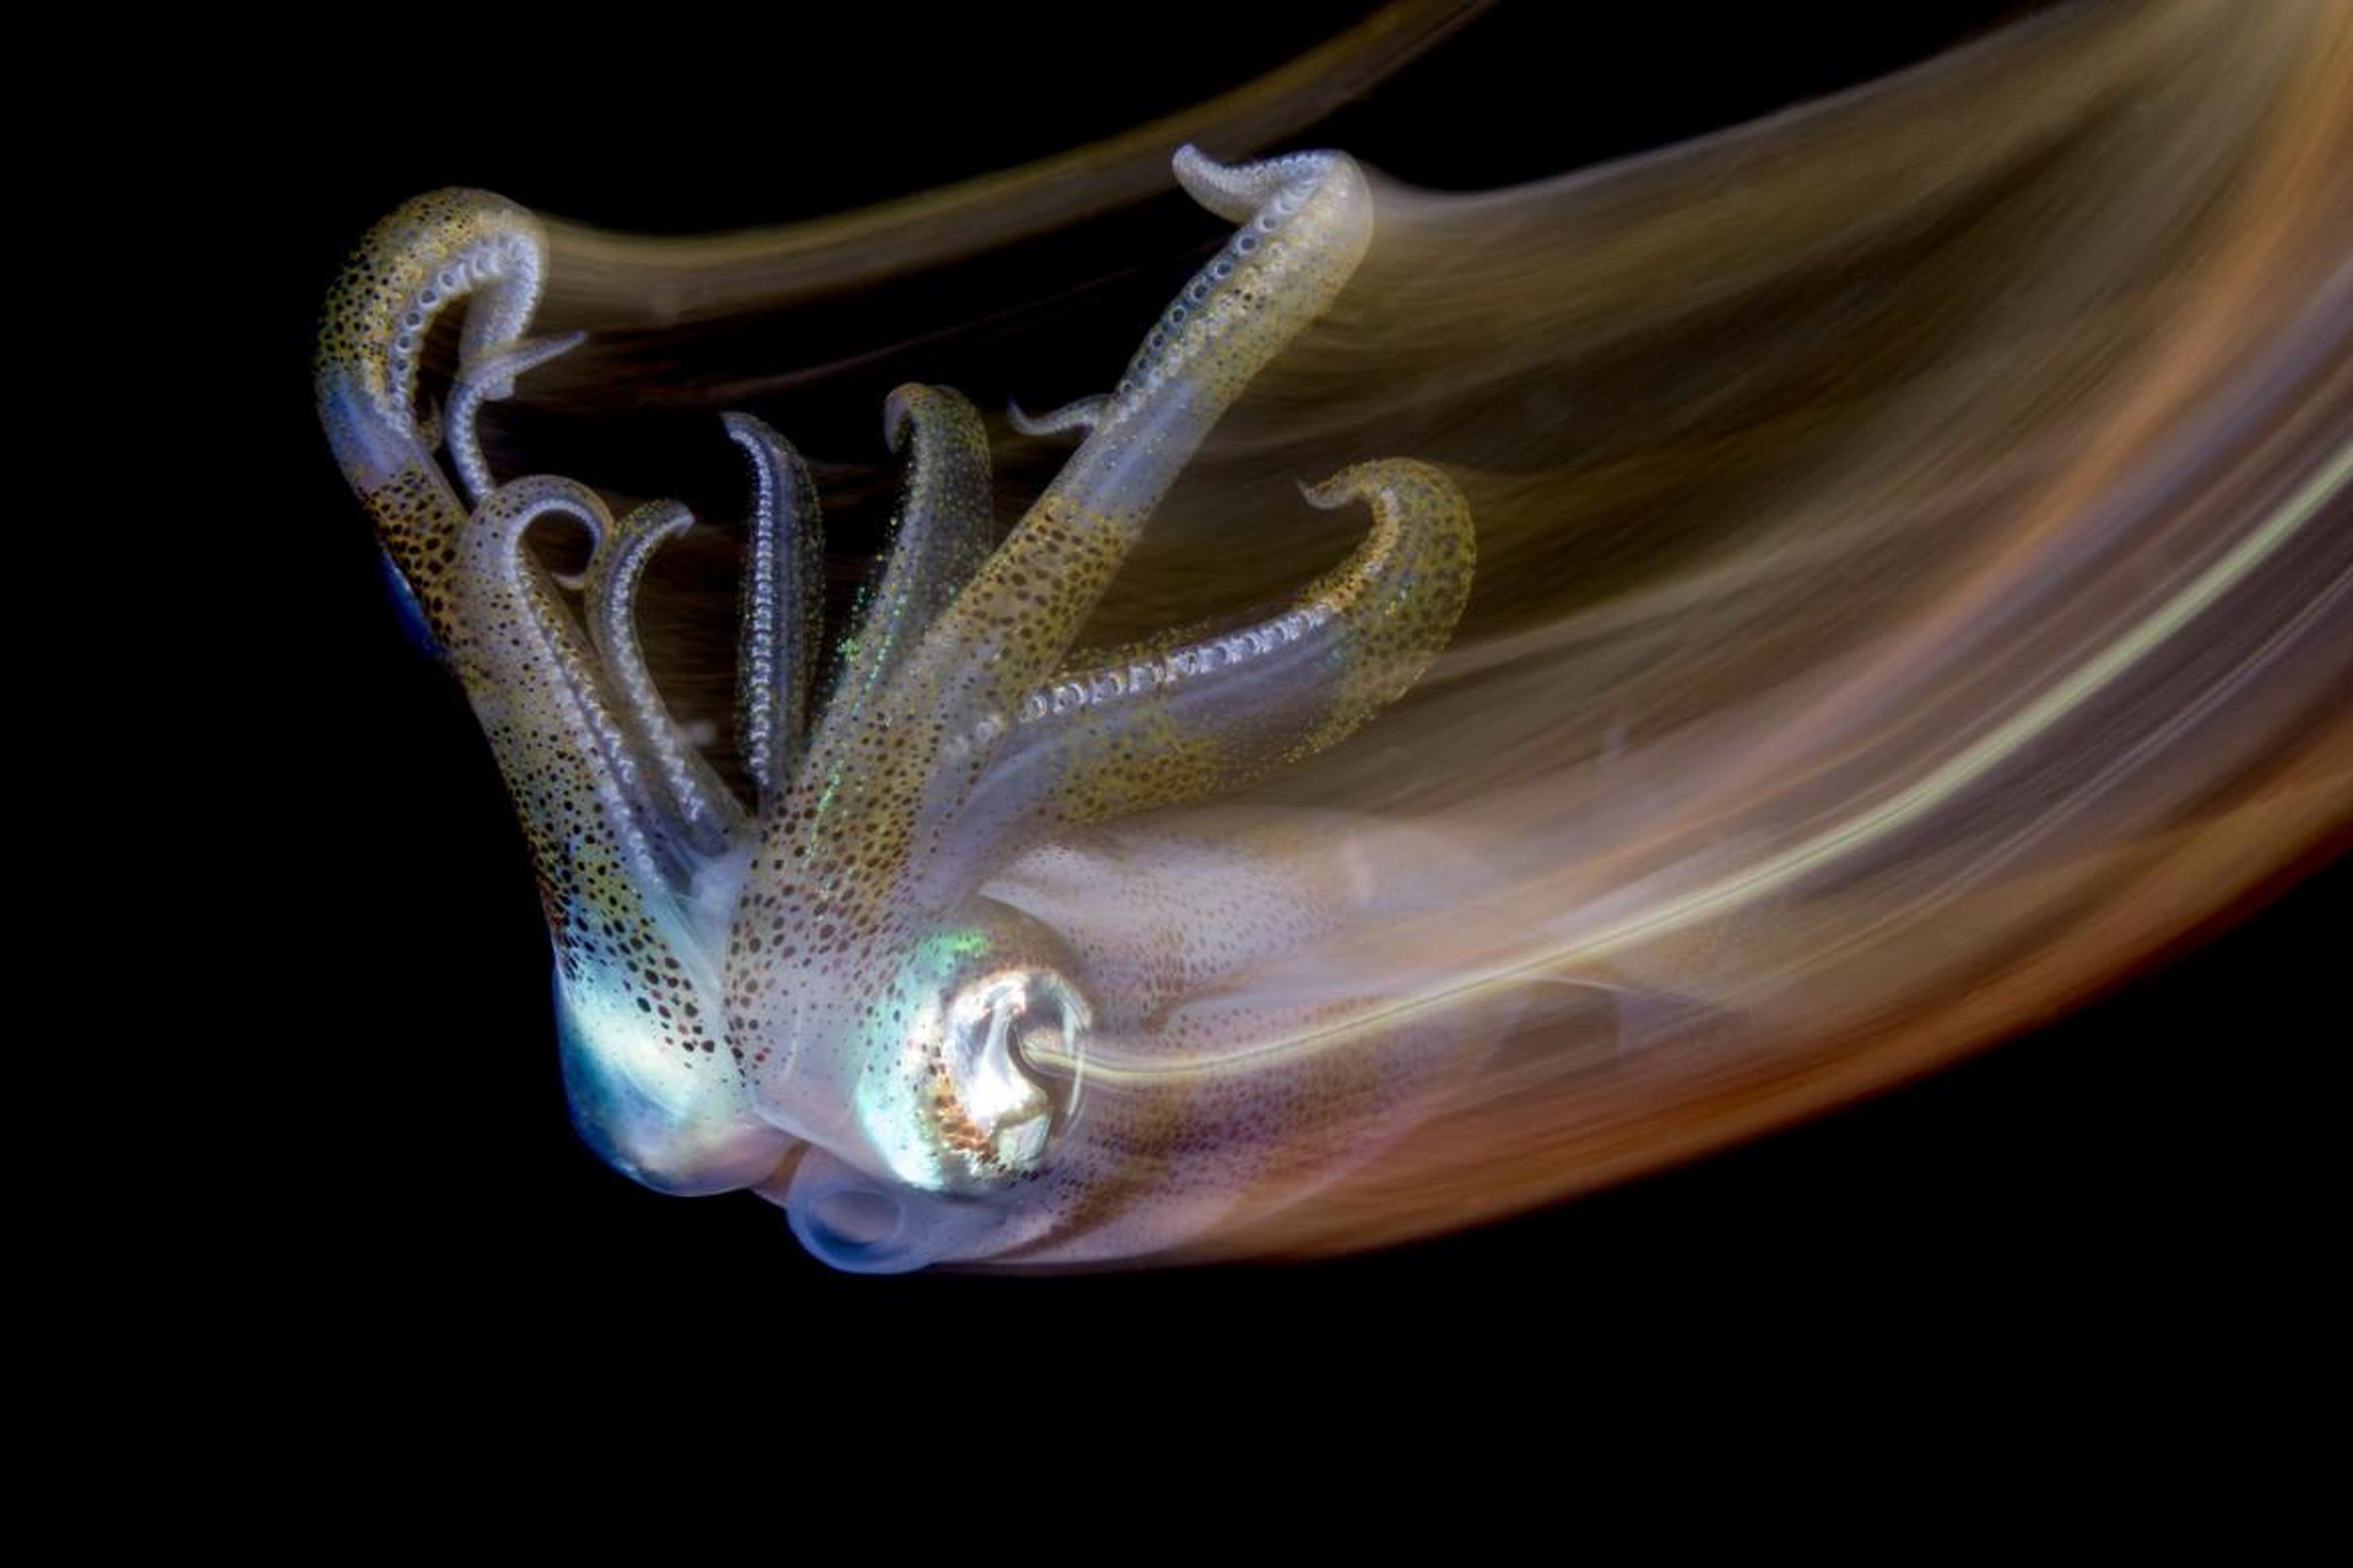 This Bigfin reef squid was also caught on camera in the Philippines, by photographer Lilian Koh.